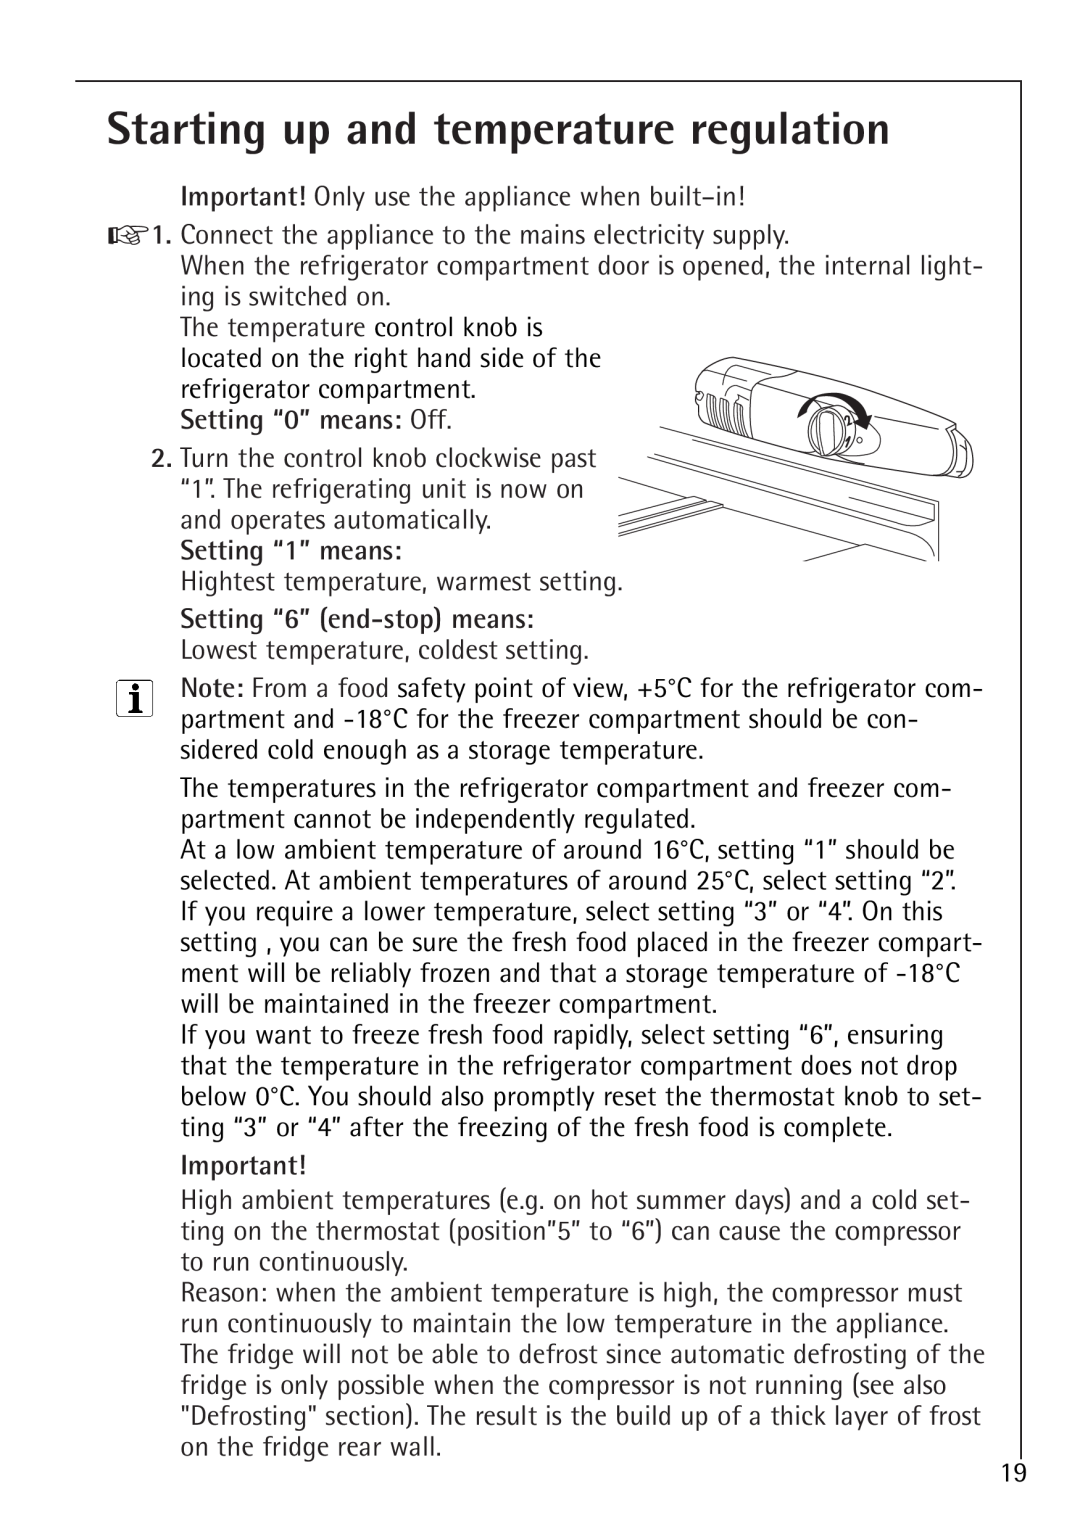 Electrolux SANTO U 86040 i installation instructions Starting up and temperature regulation, Setting “0” means Off 